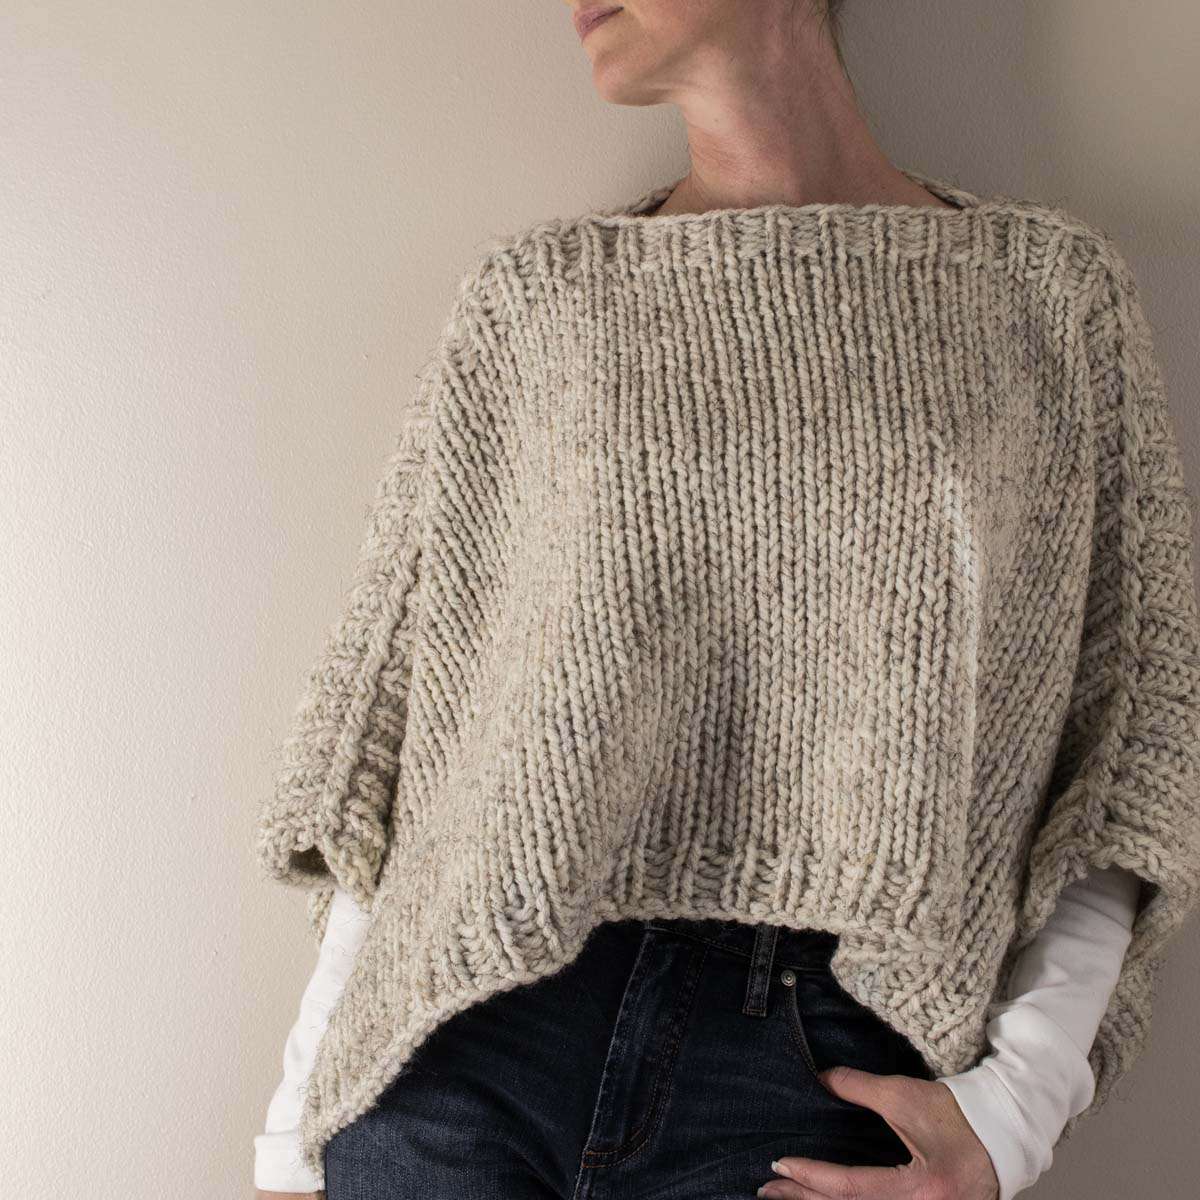 27 Free Poncho Knitting Patterns - Best of the Best